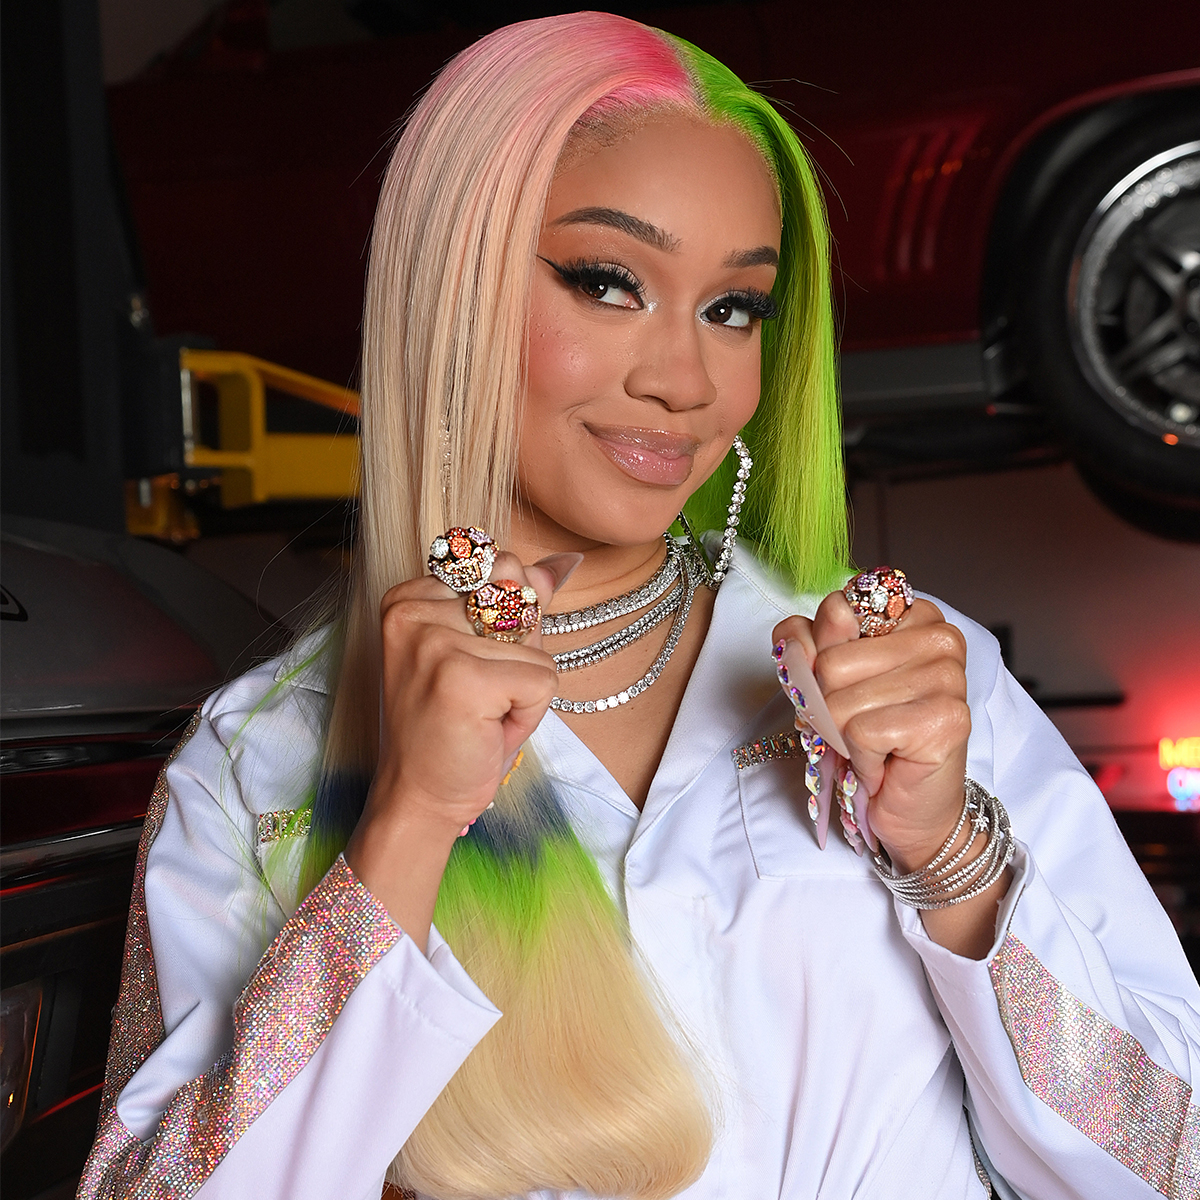 Saweetie Reveals Why Debut Album Has Been Delayed for Nearly 2 Years